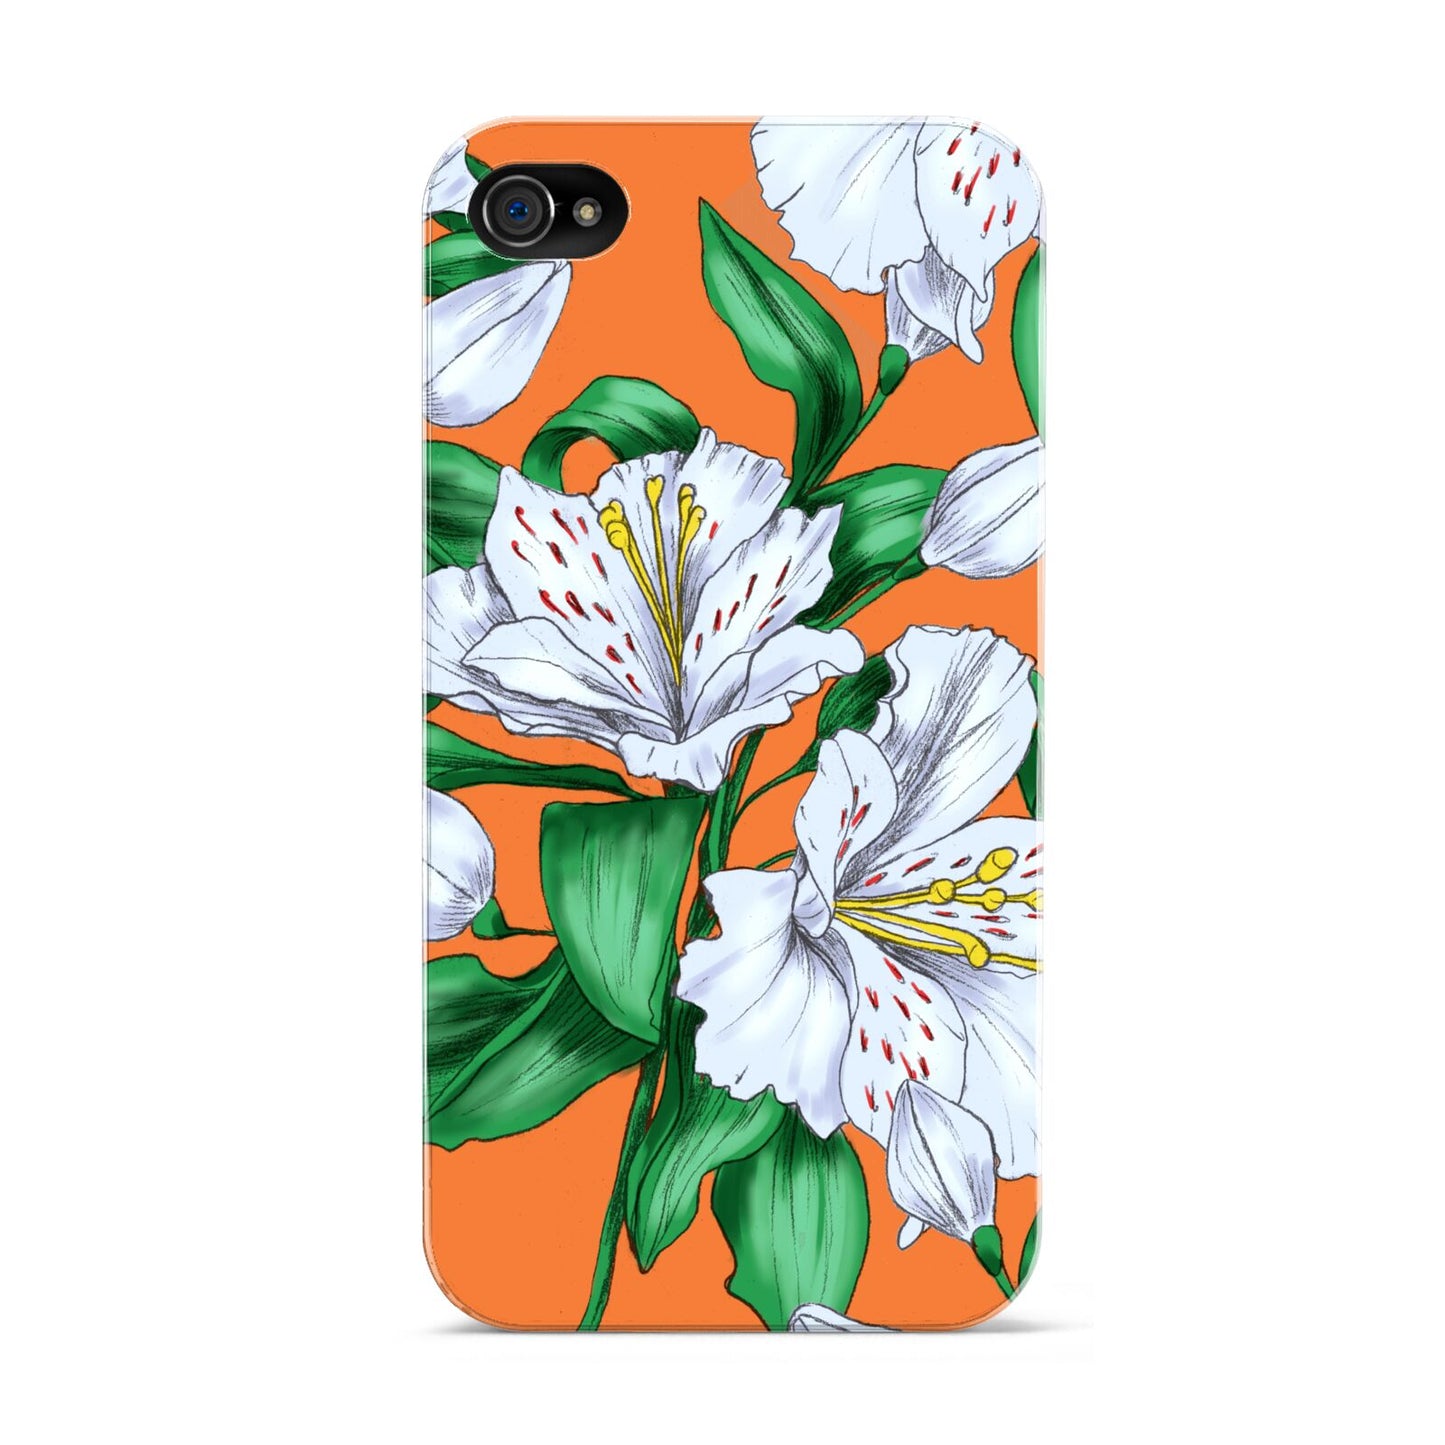 Lily Apple iPhone 4s Case